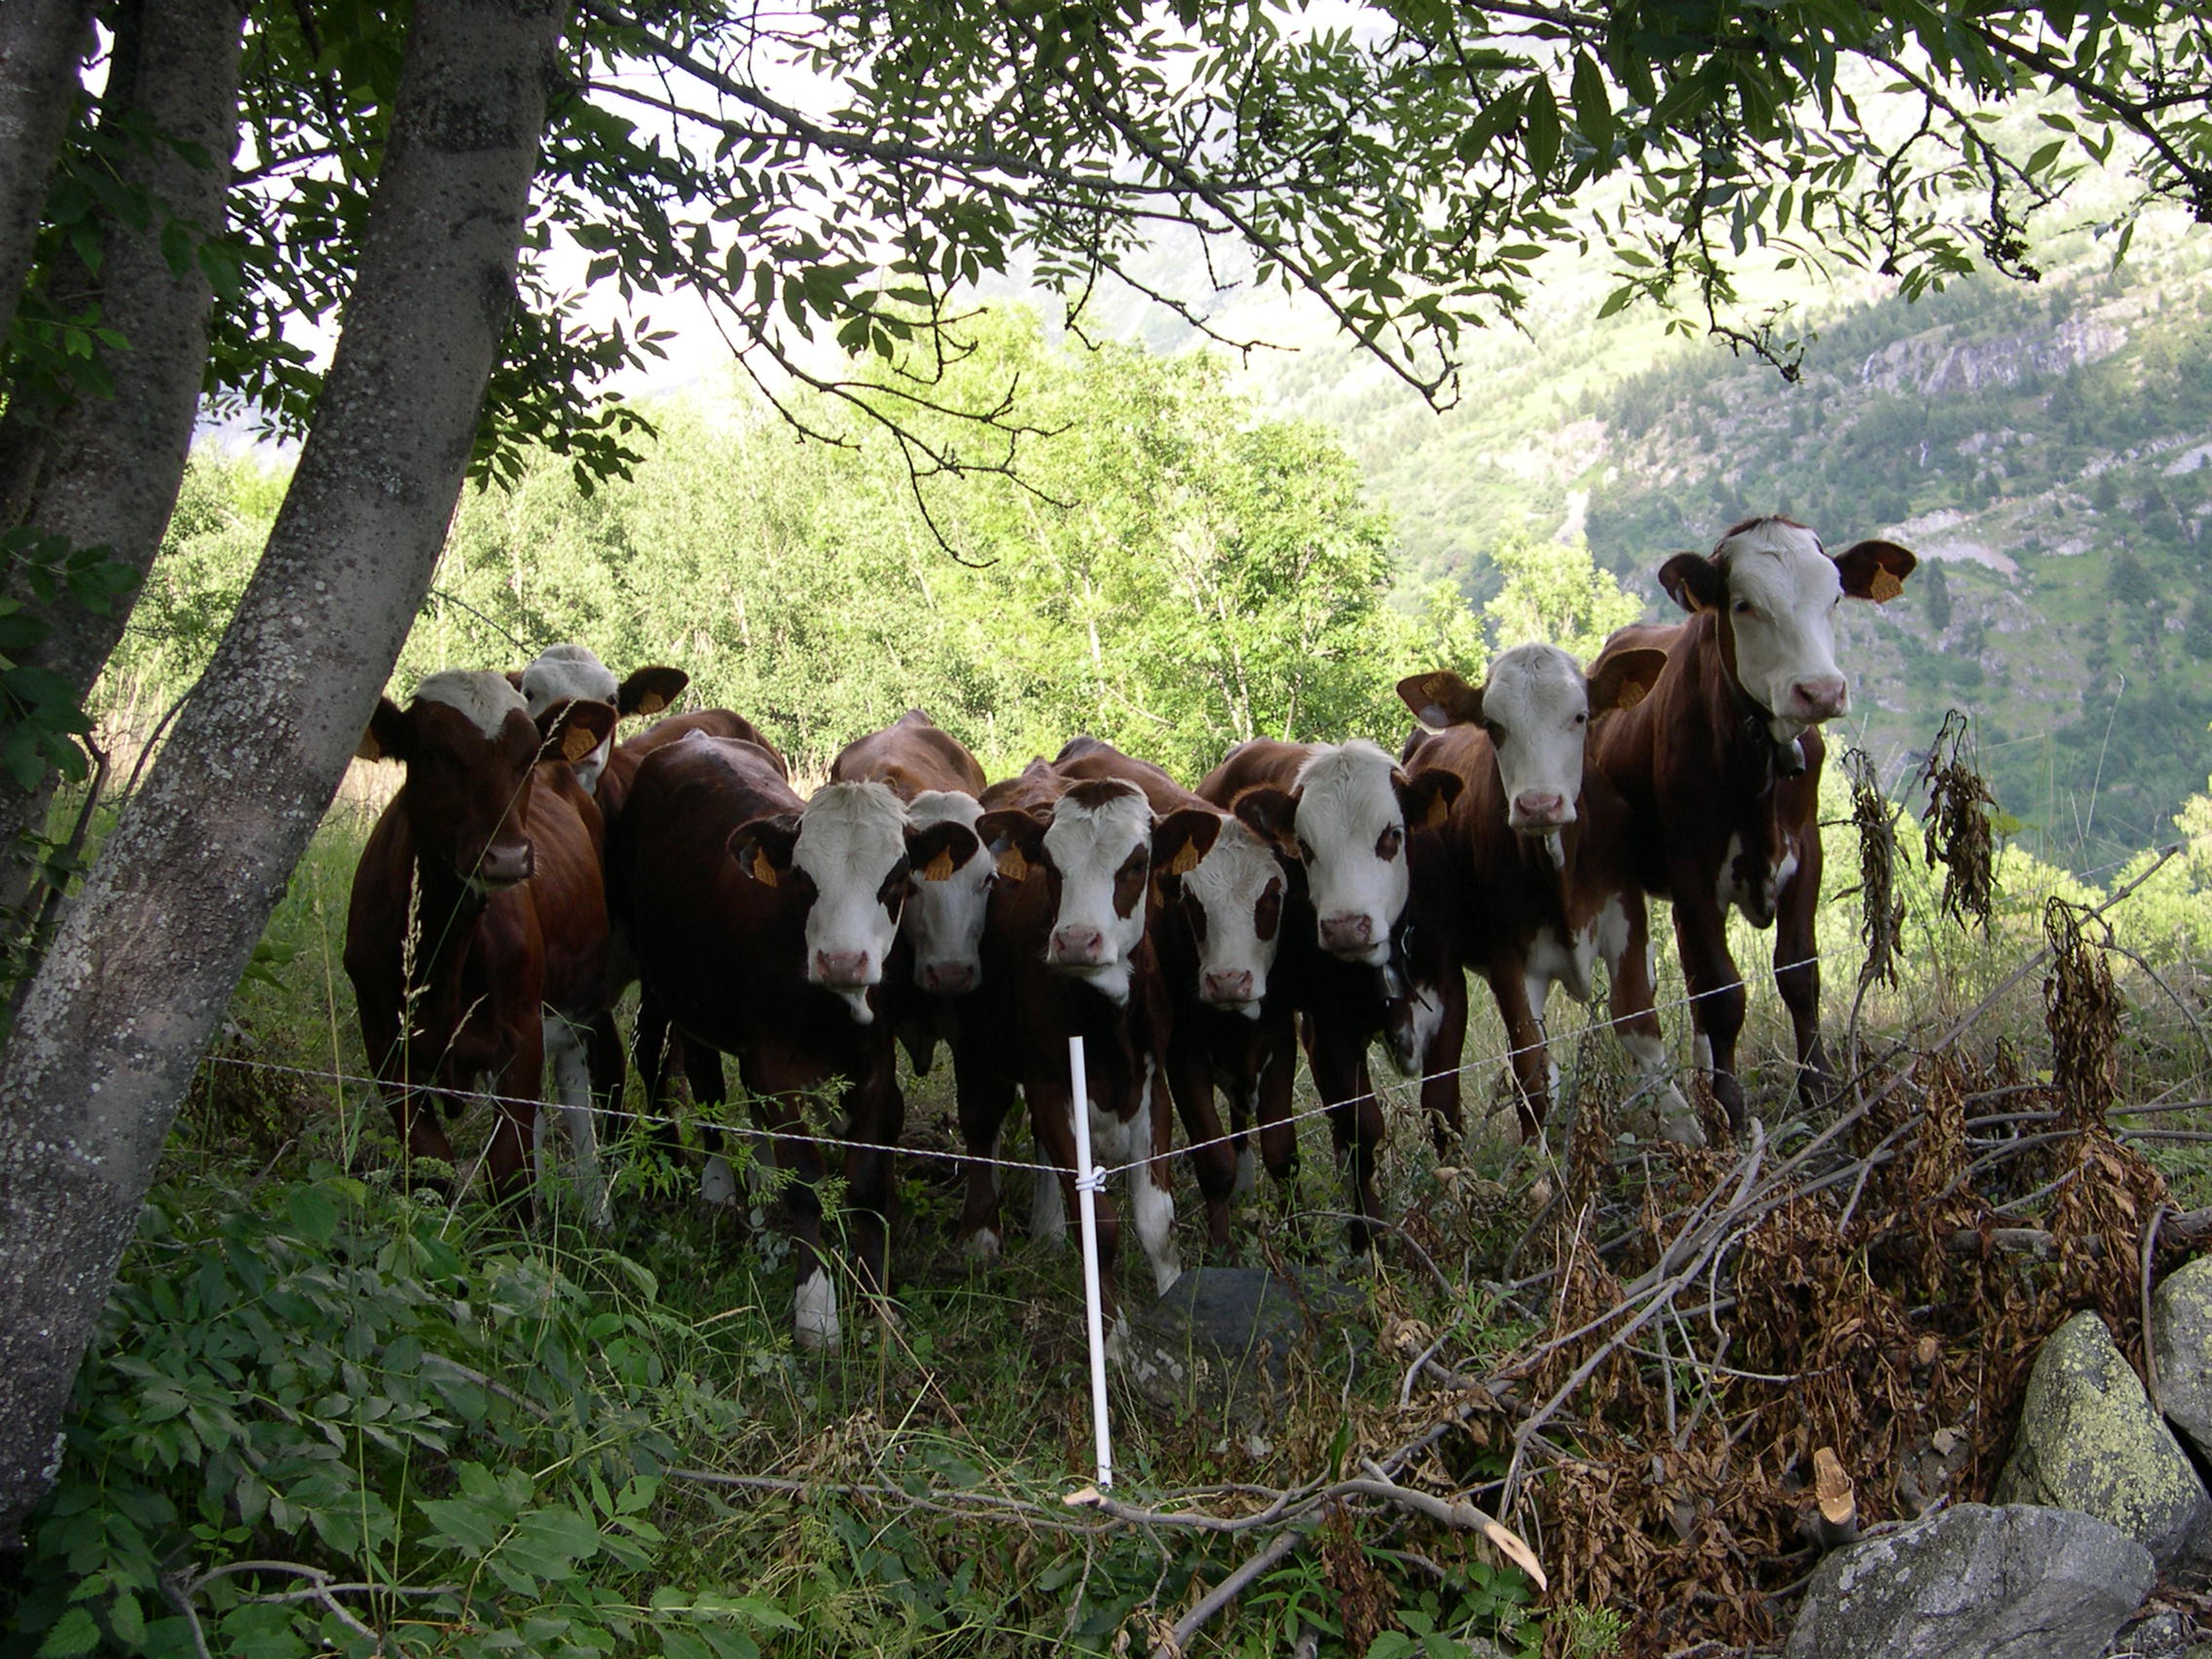 Cows in a row